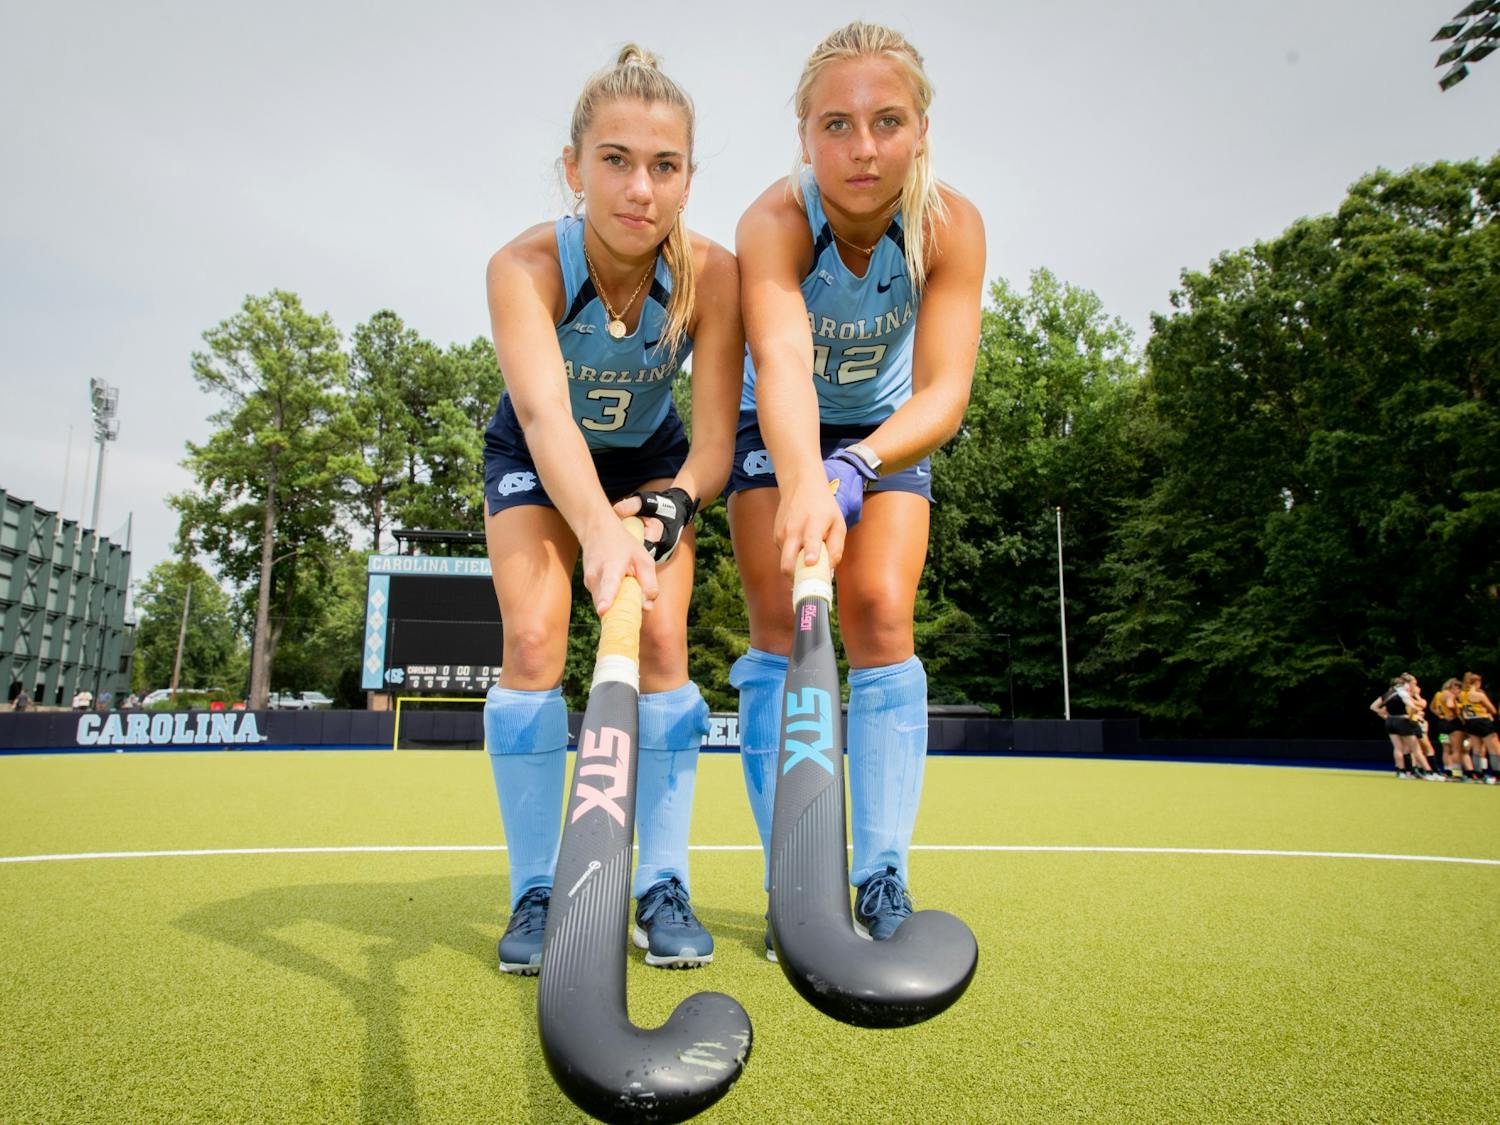 First-years Ashley Sessa (3) and Ryleigh Heck (12) are new faces at Carolina but bring a long resume of excellence to the field hockey team.